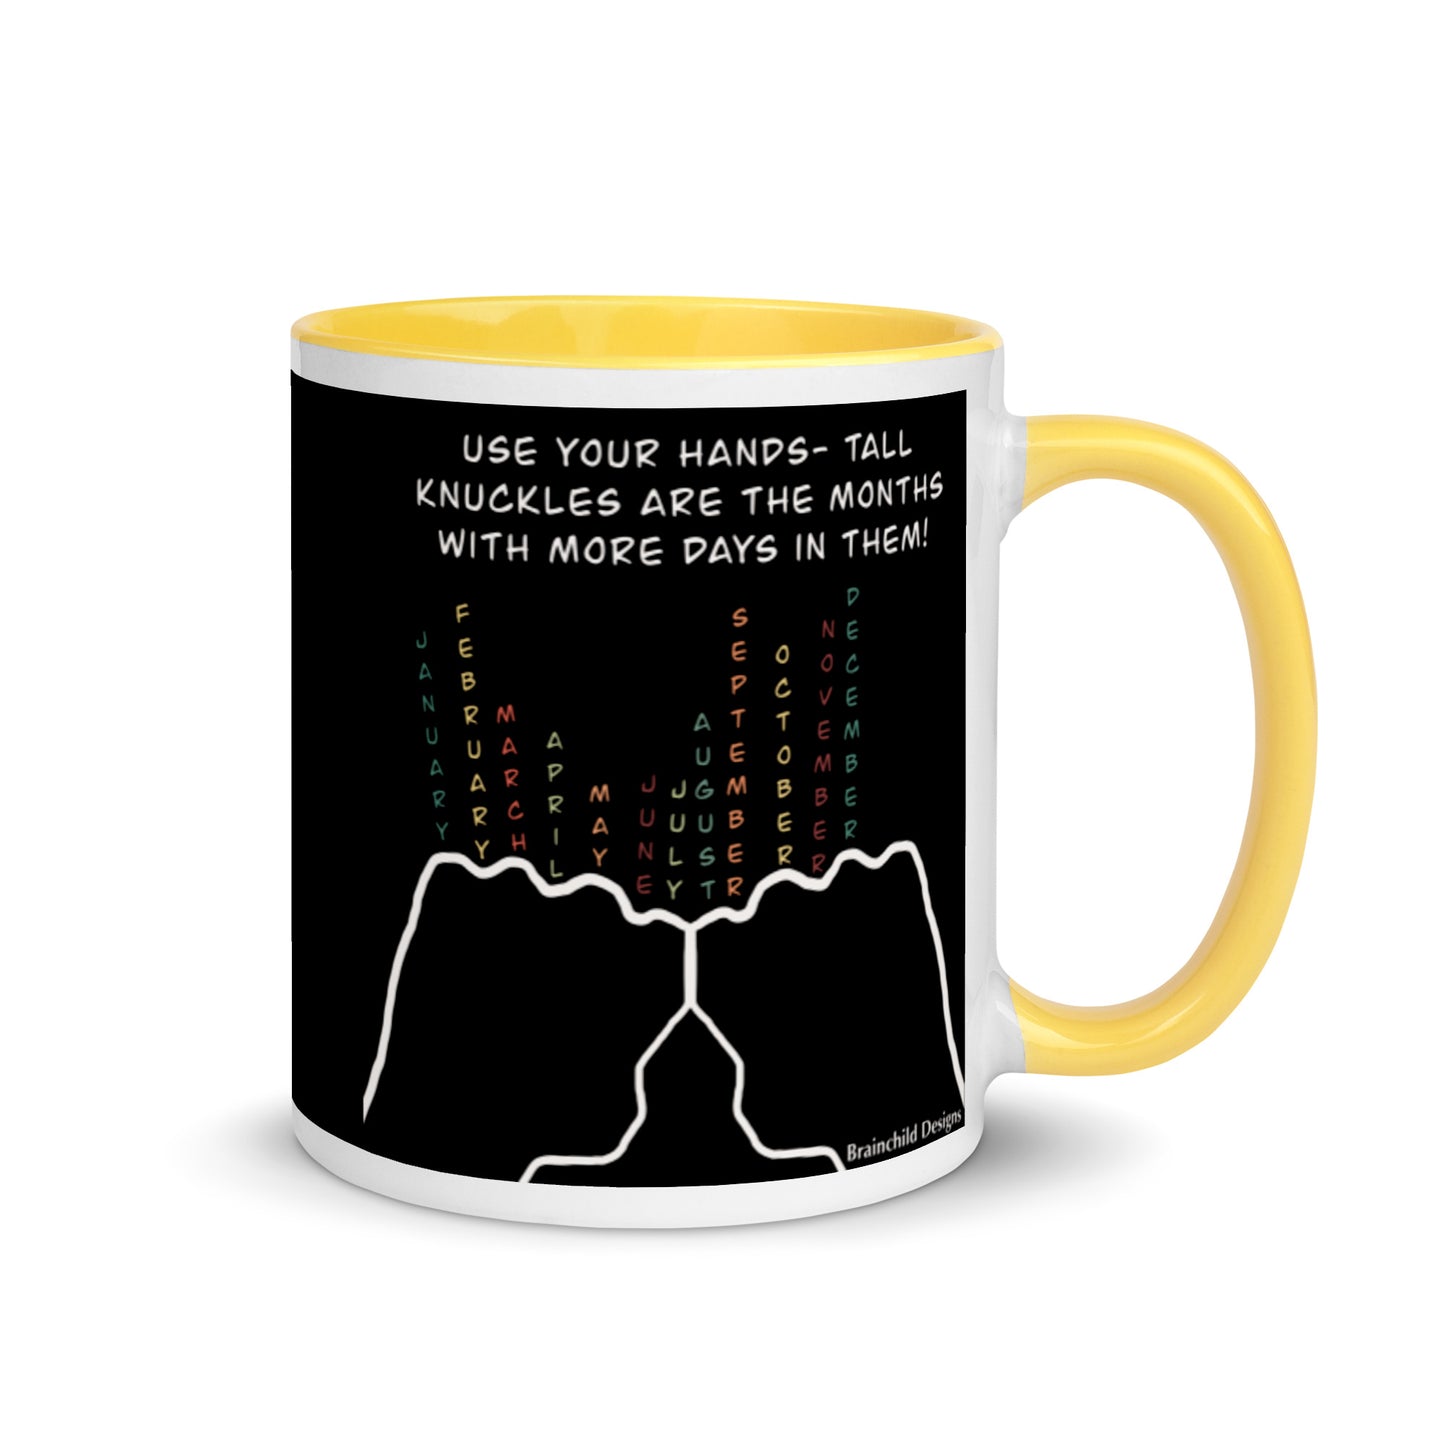 Knuckle Mugs for # of Days in Months - Brainchild Designs